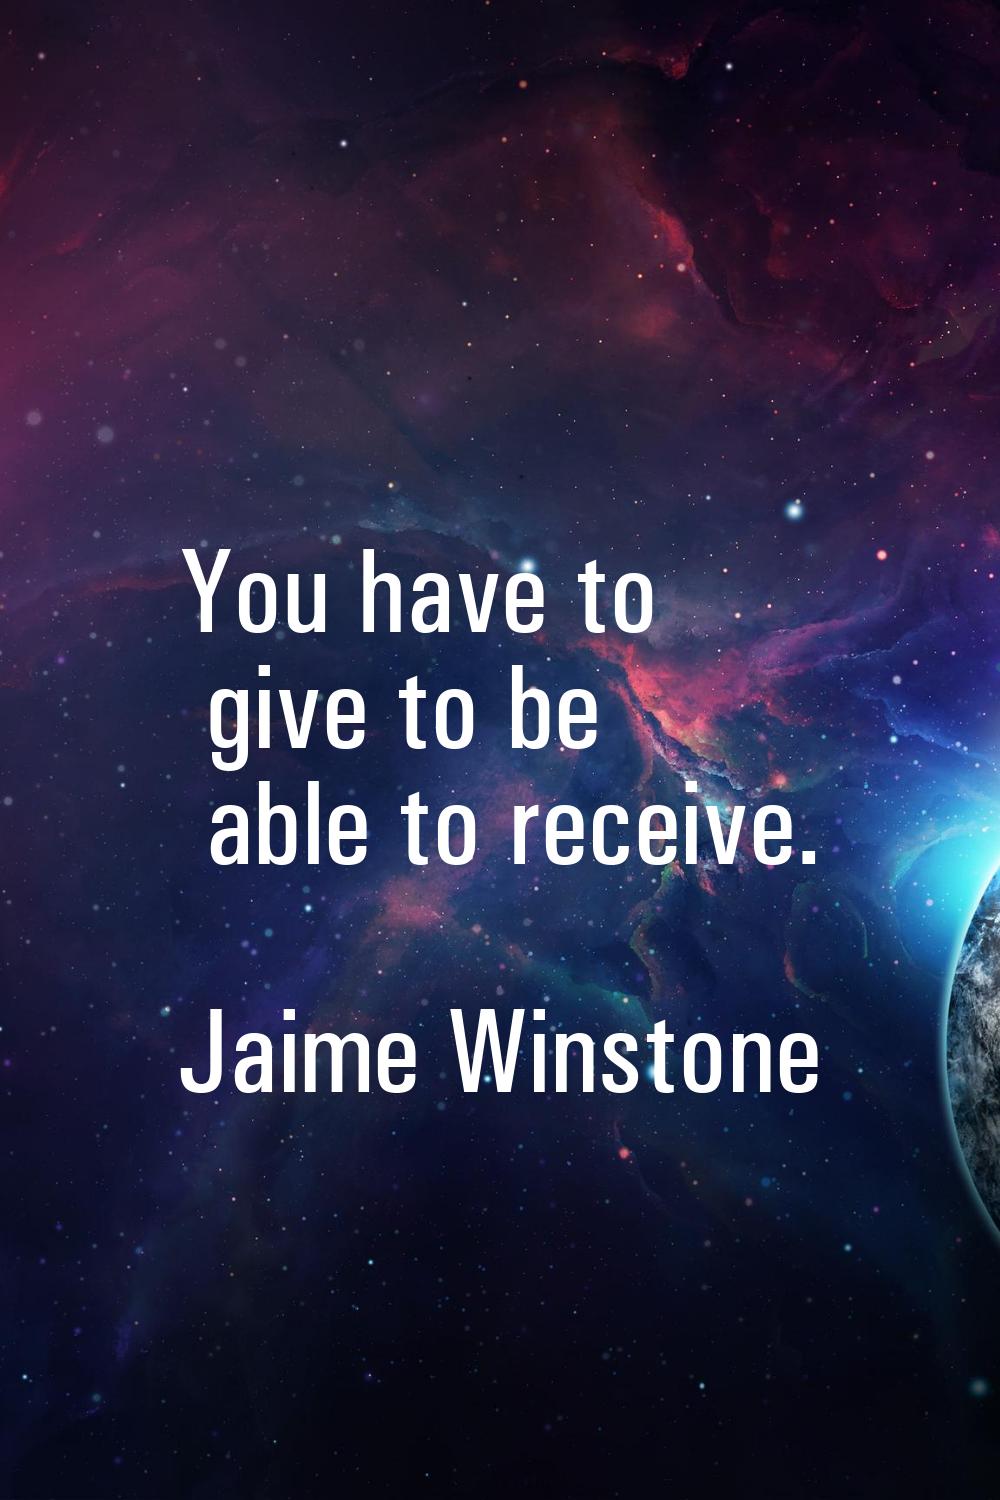 You have to give to be able to receive.